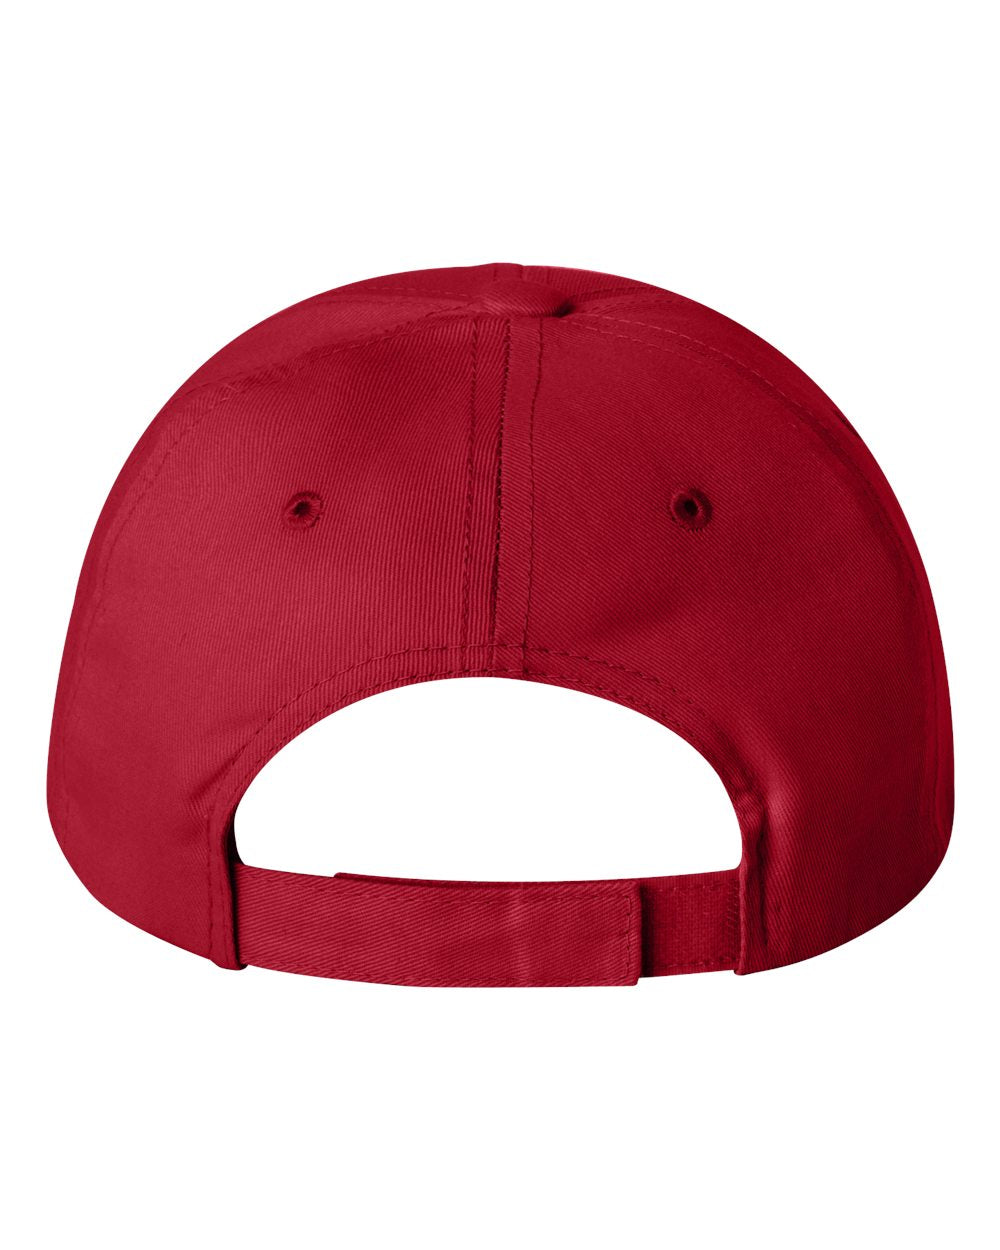 Sportsman Adult Cotton Twill Cap 2260 #color_Red